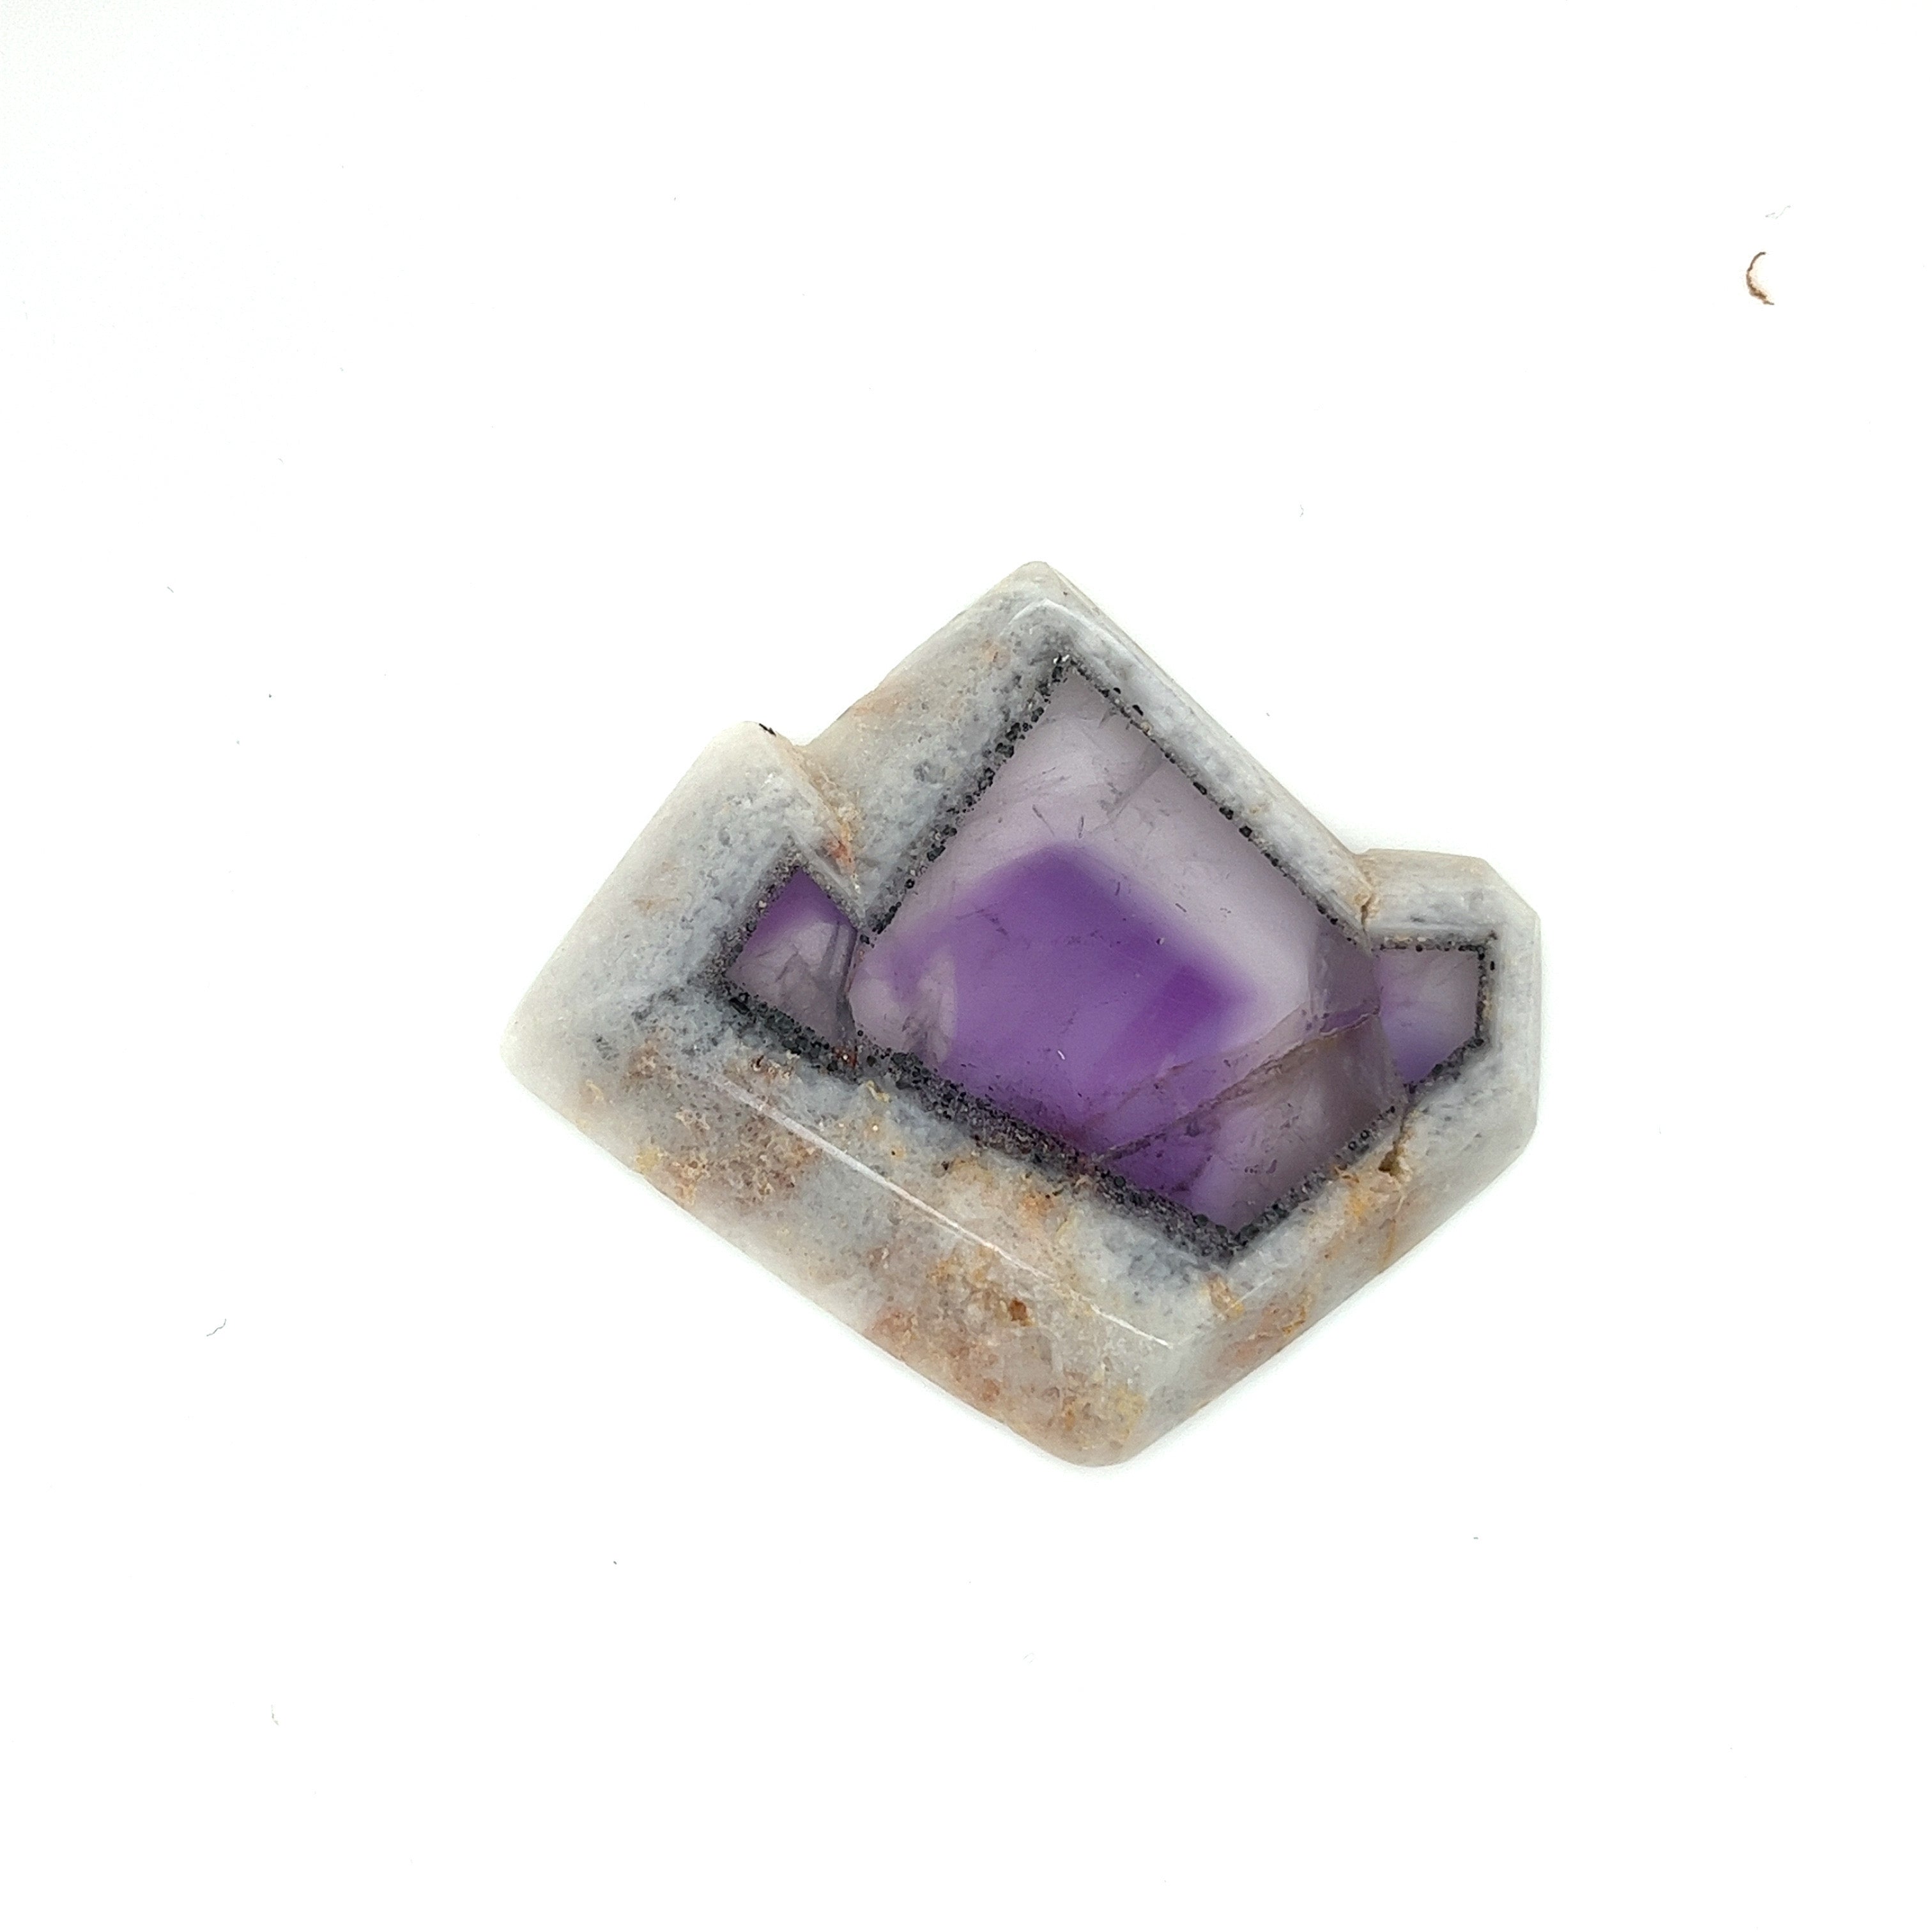 Trapiche Amethyst; Natural Untreated India Amethyst Slice, 16 grams - Mark Oliver Gems